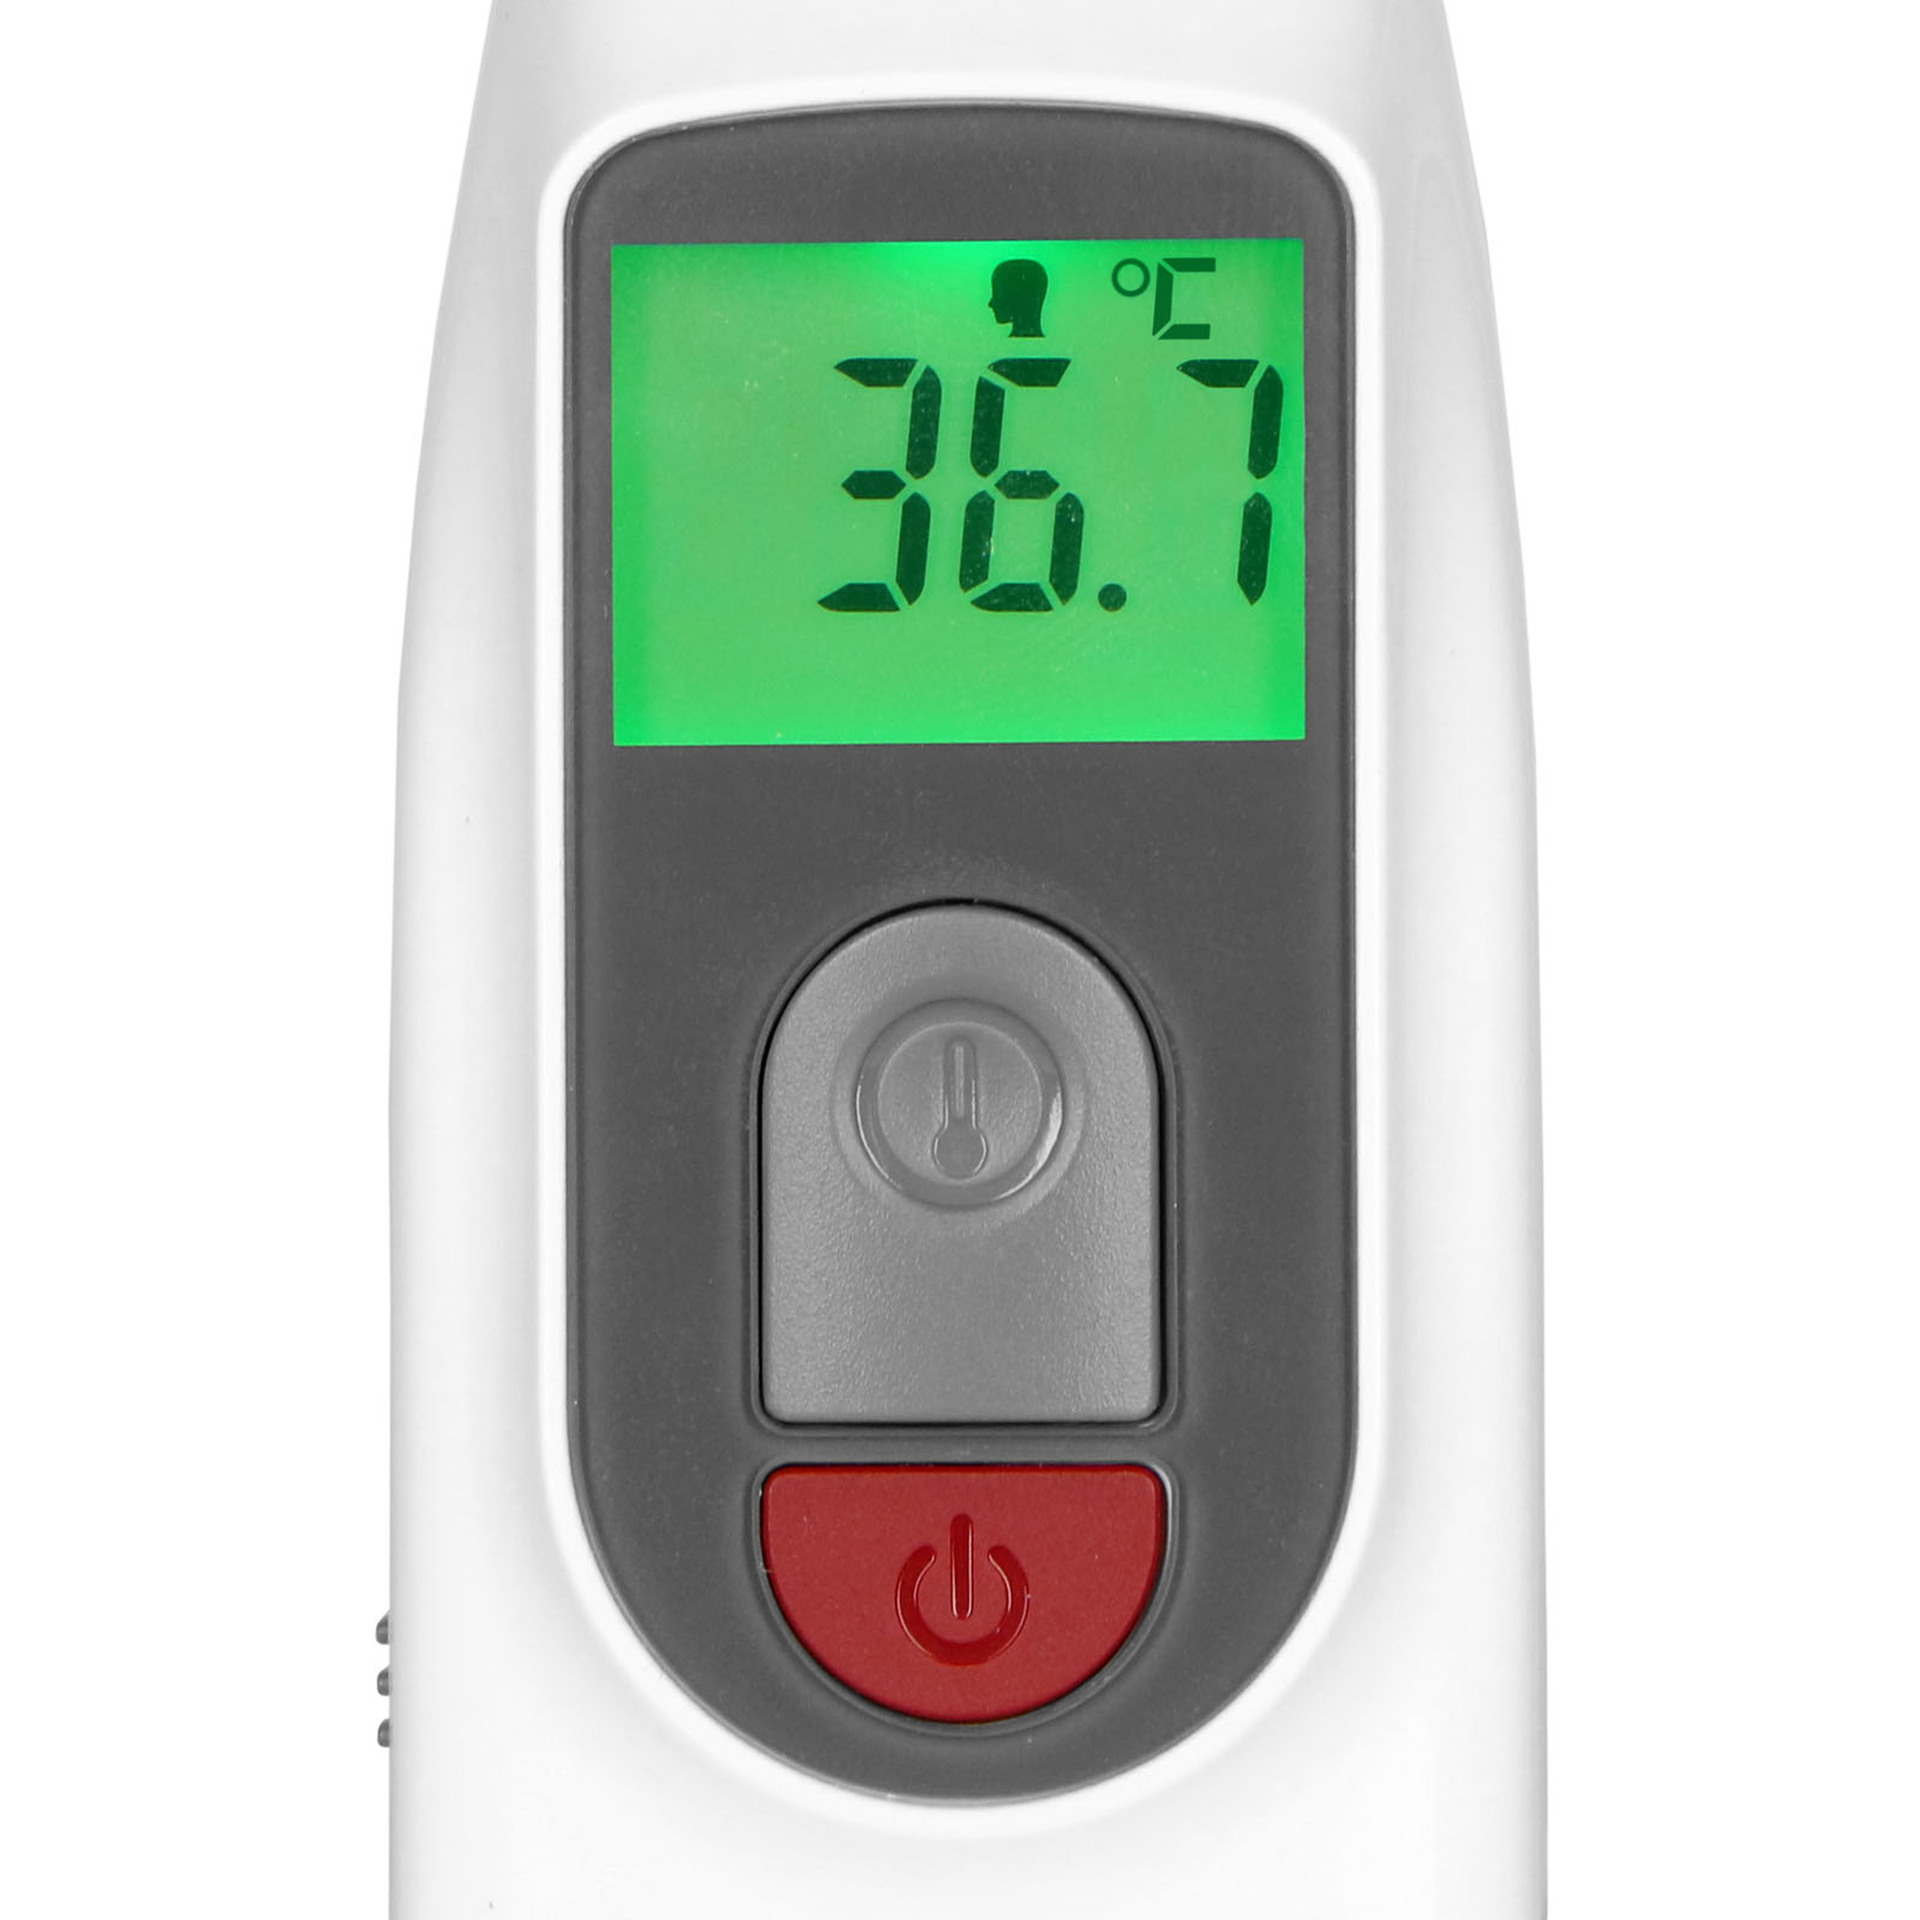 Infrarot-Thermometer ALECTO der BC38 an Stirn) (Messart: